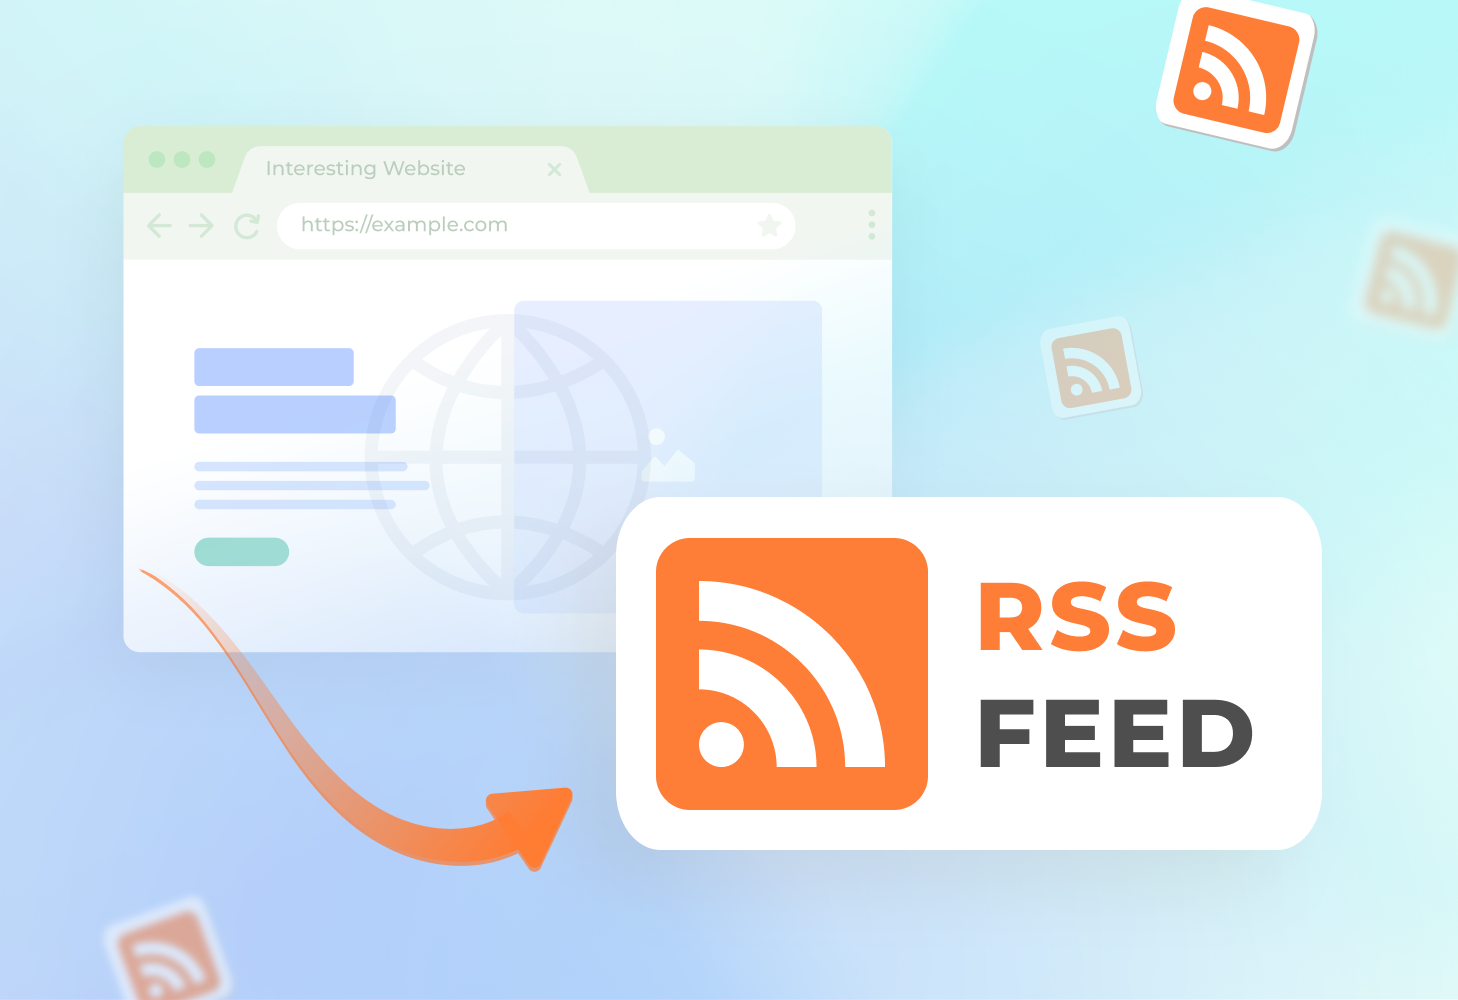 Follow Websites that Don’t Have an RSS Feed